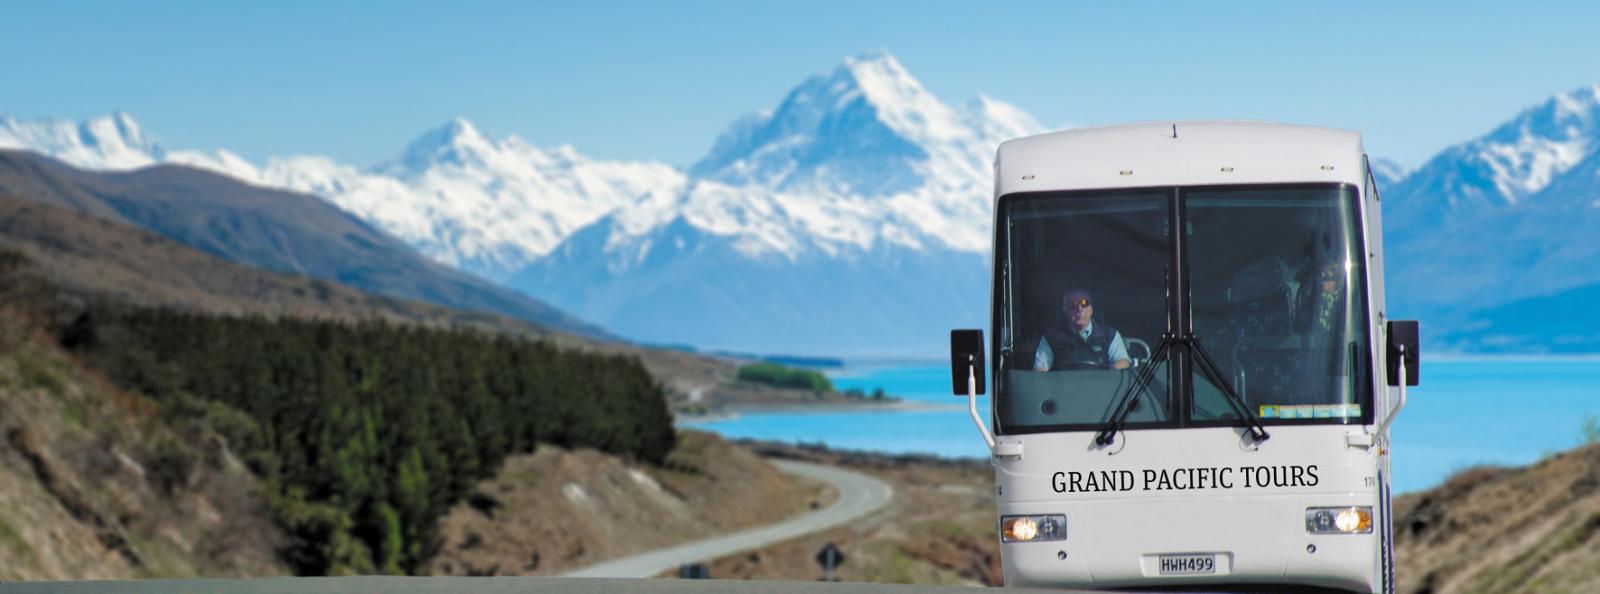 Grand Pacific Tours - Best Price Guaranteed